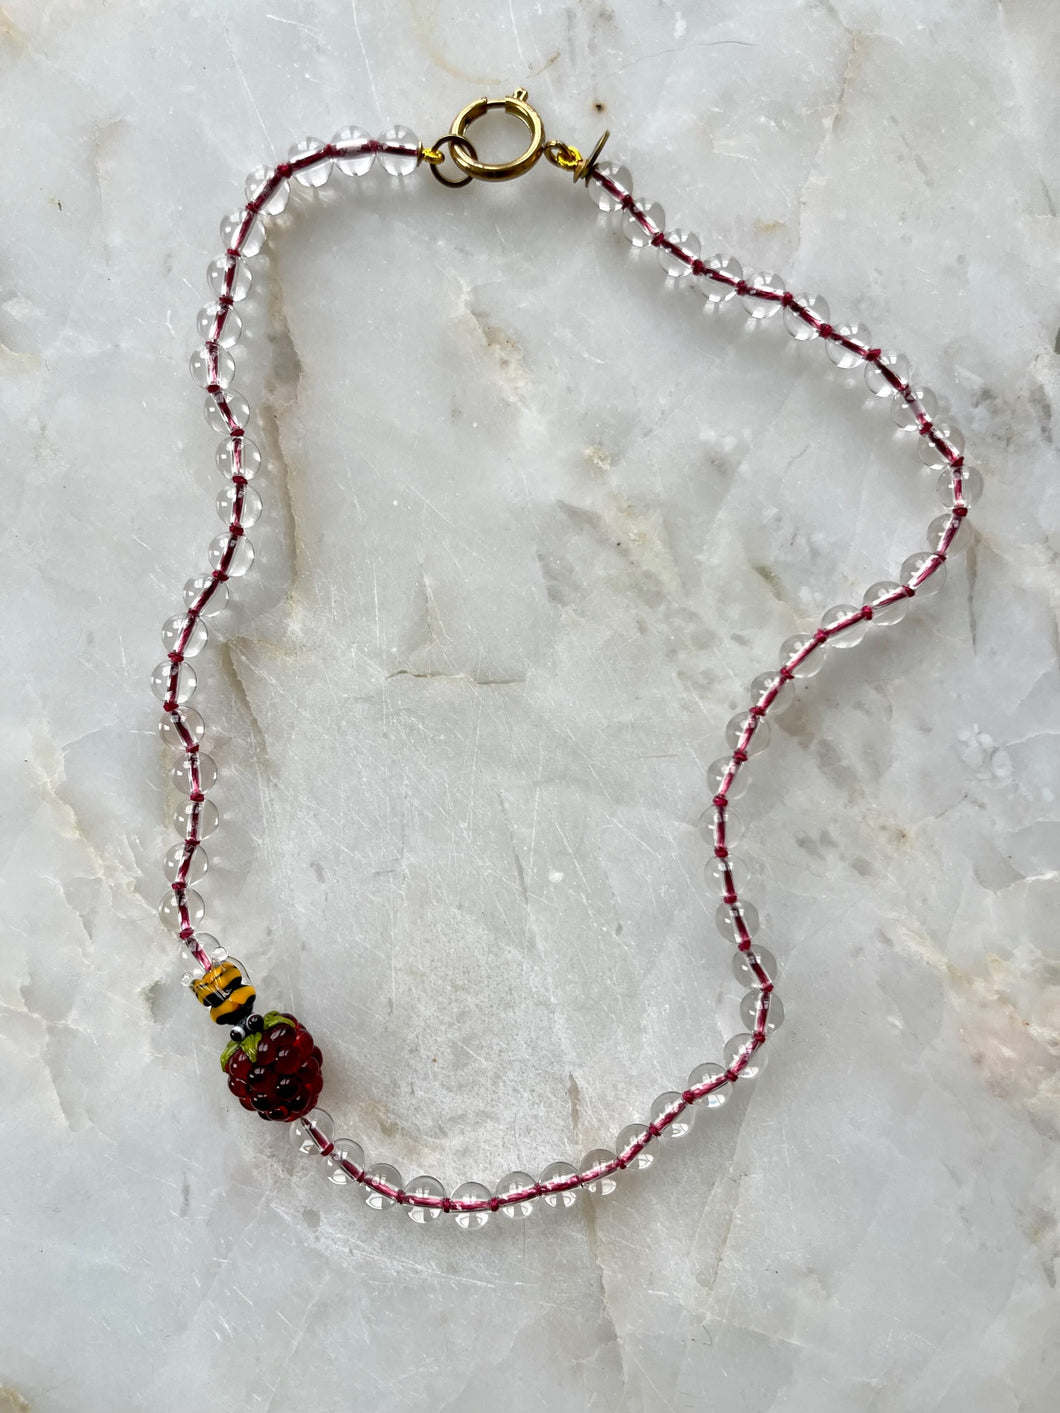 The Berry Juicy necklace